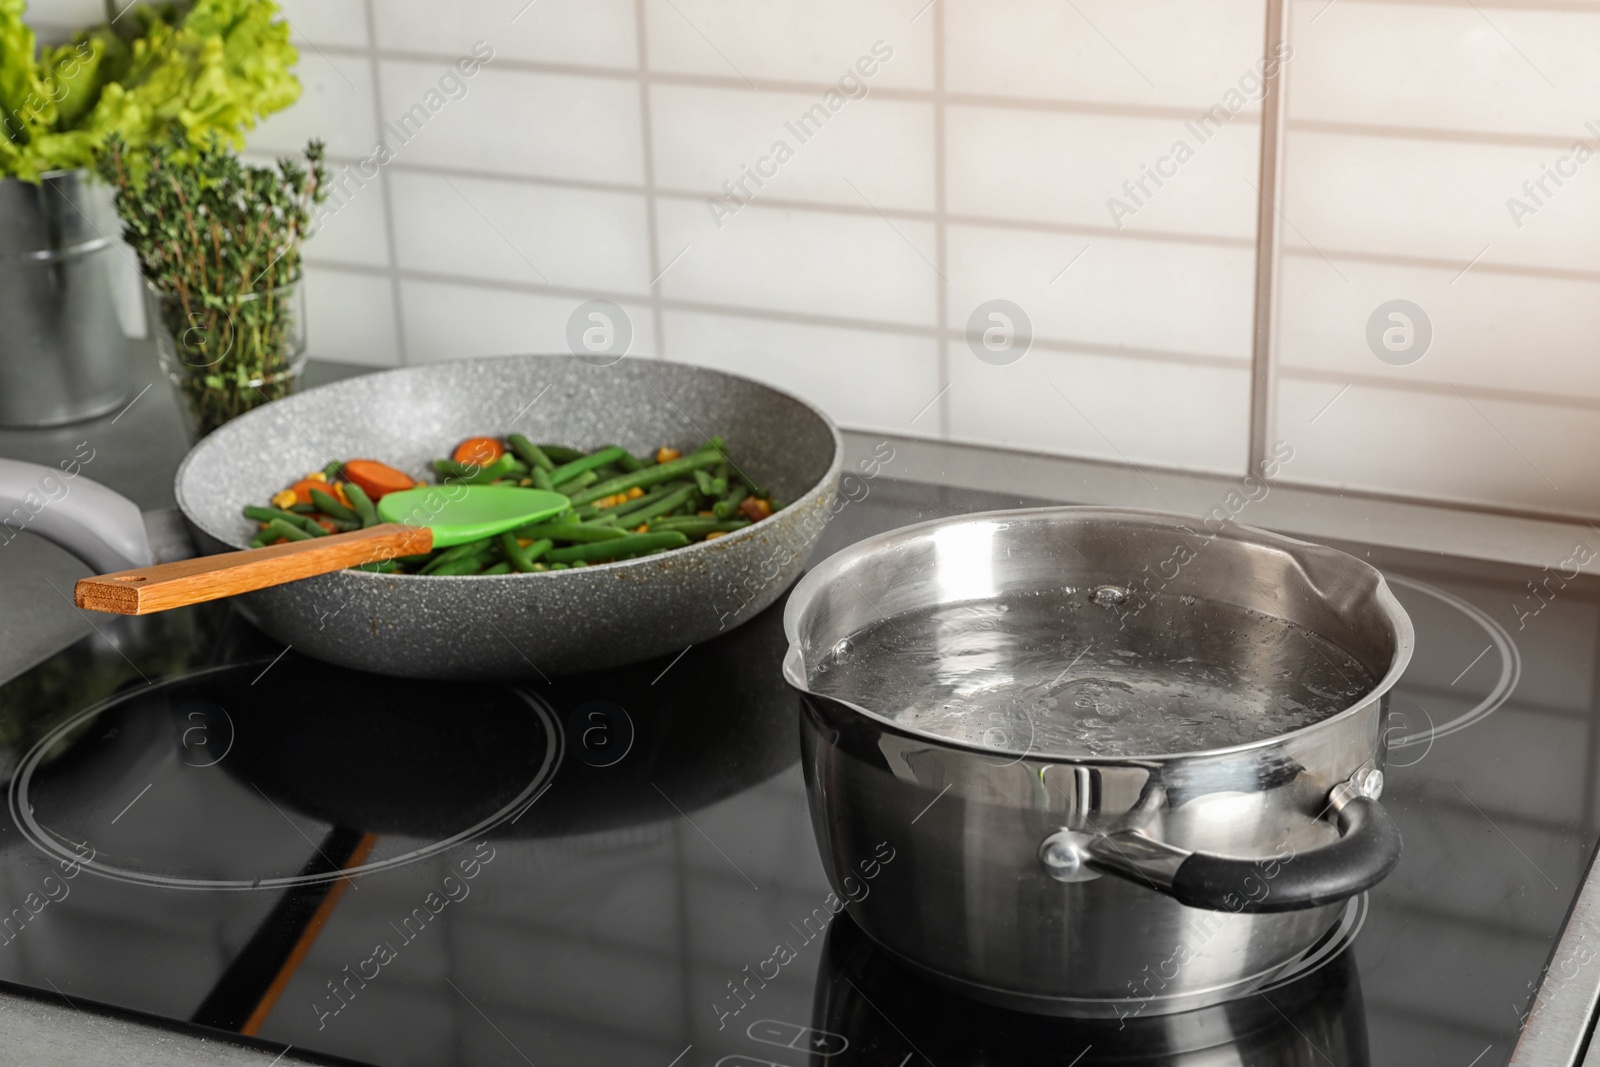 Photo of Pot near frying pan with vegetables on electric stove in kitchen